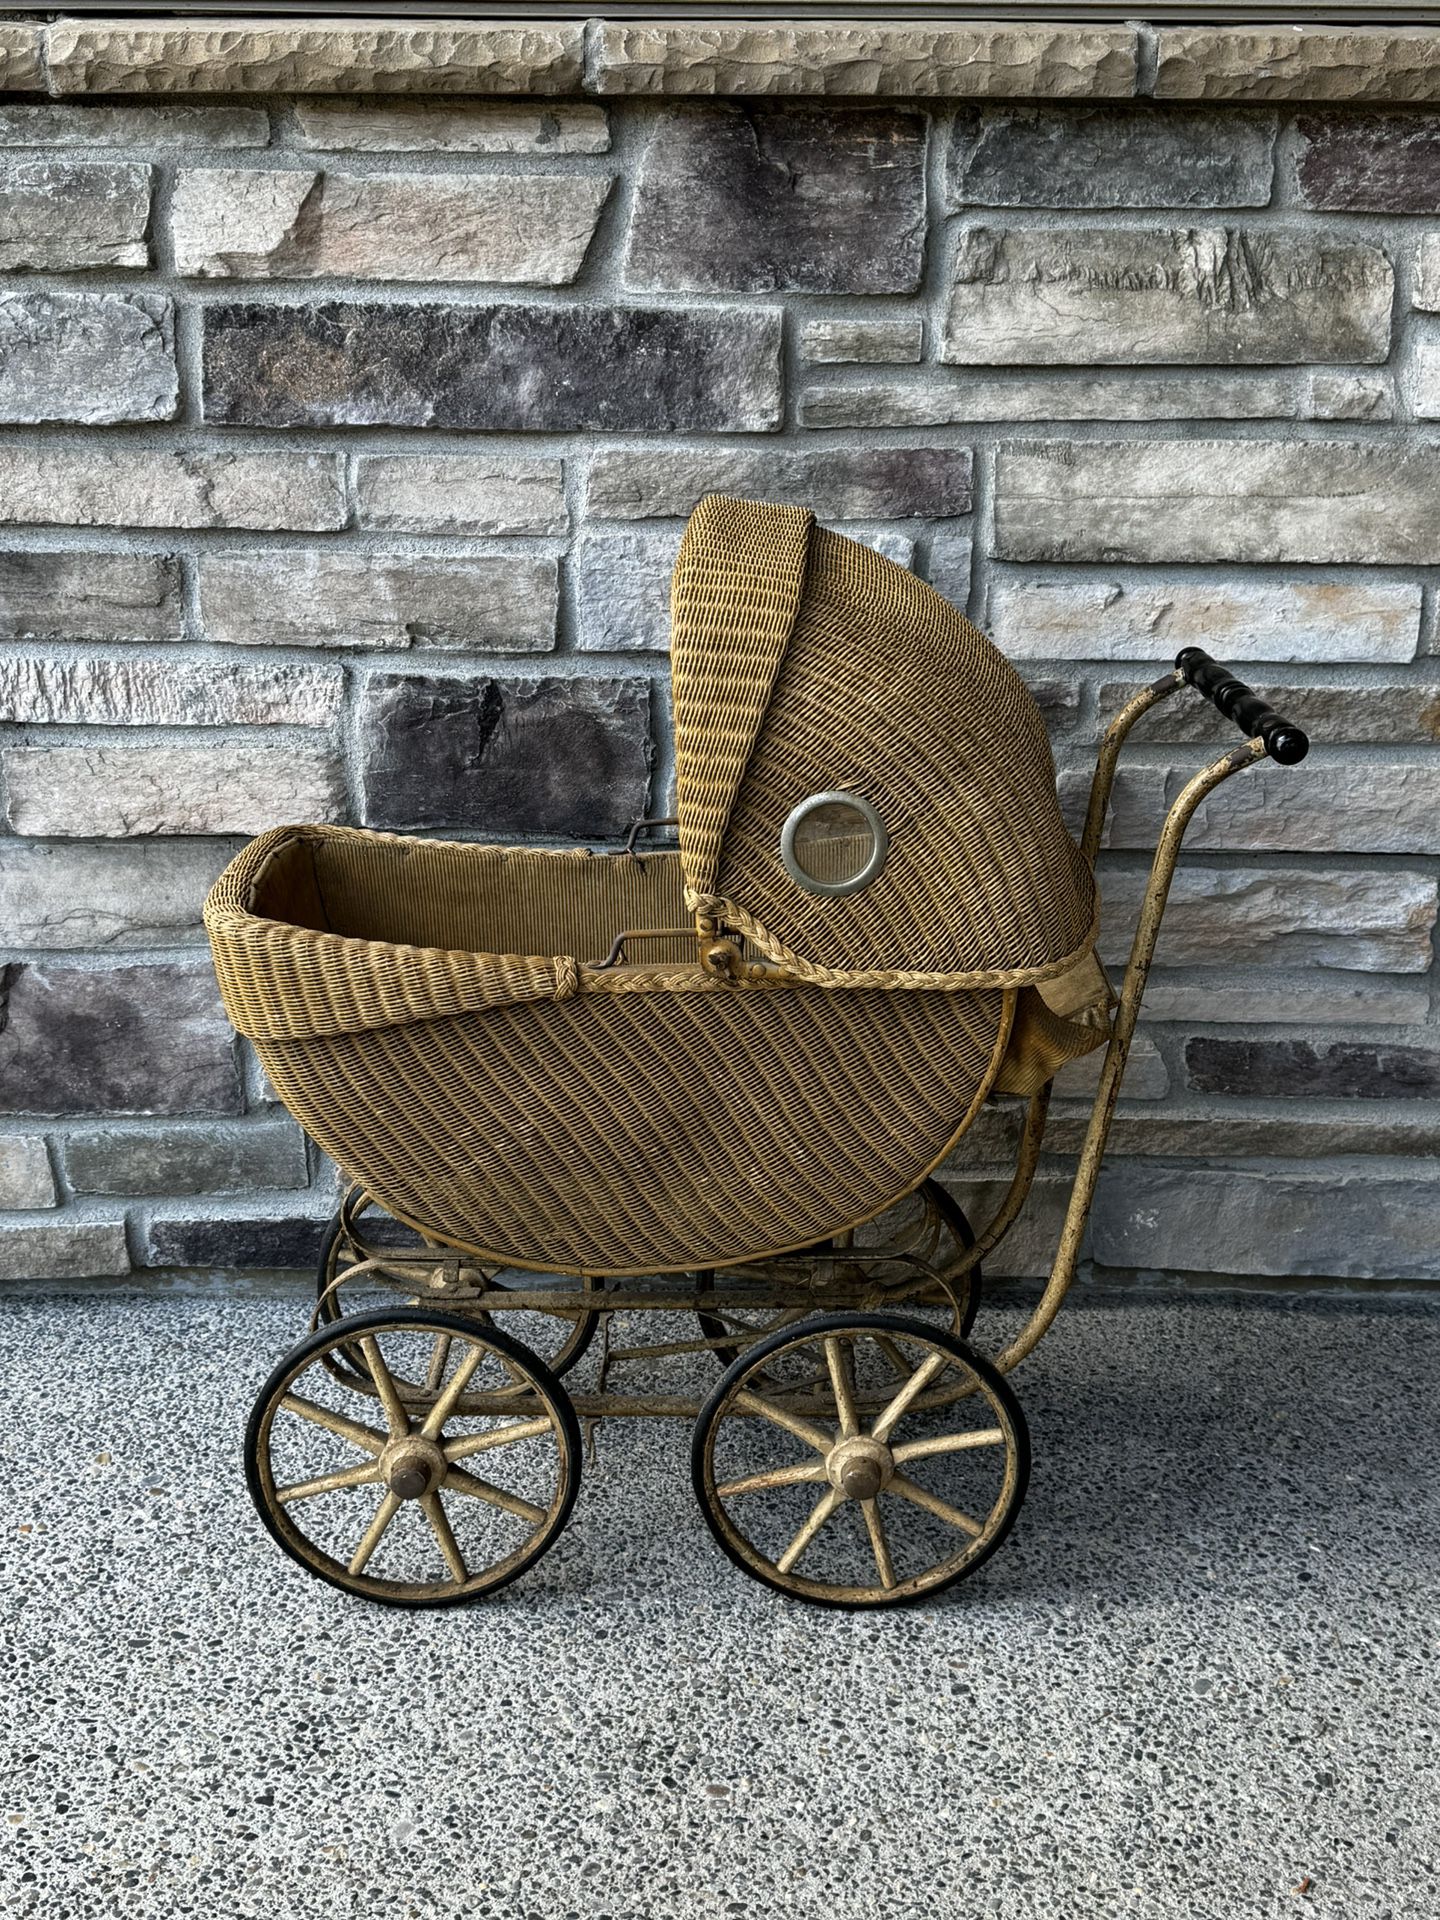 Antique Wicker Style Baby Buggy